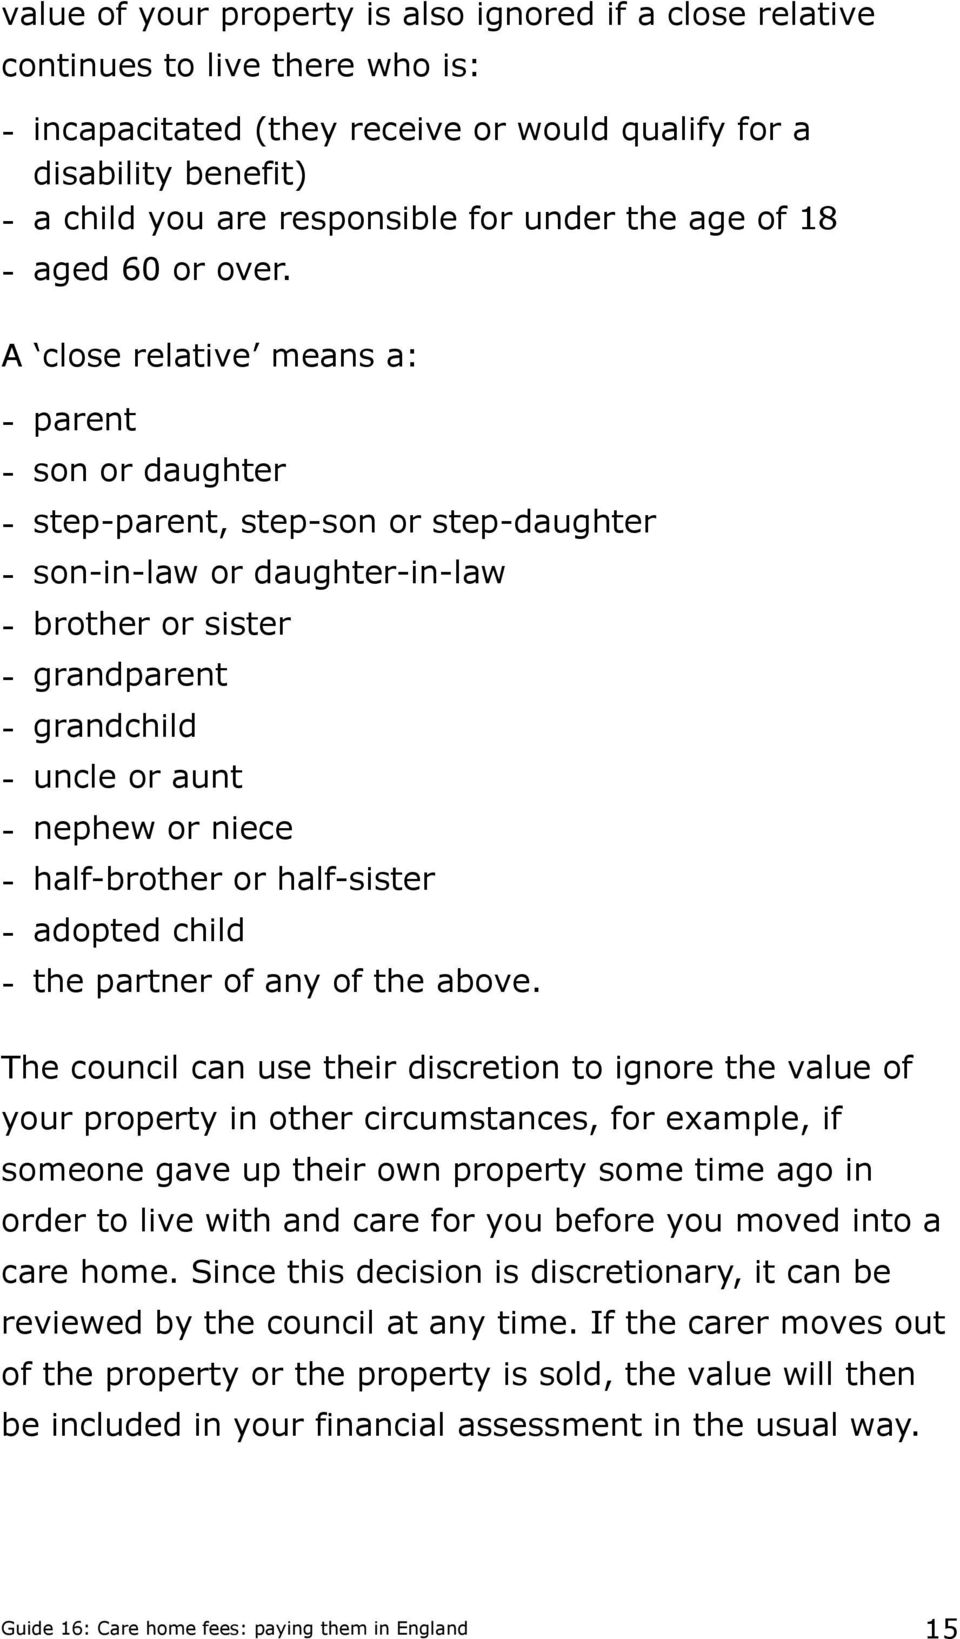 A close relative means a: - parent - son or daughter - step-parent, step-son or step-daughter - son-in-law or daughter-in-law - brother or sister - grandparent - grandchild - uncle or aunt - nephew